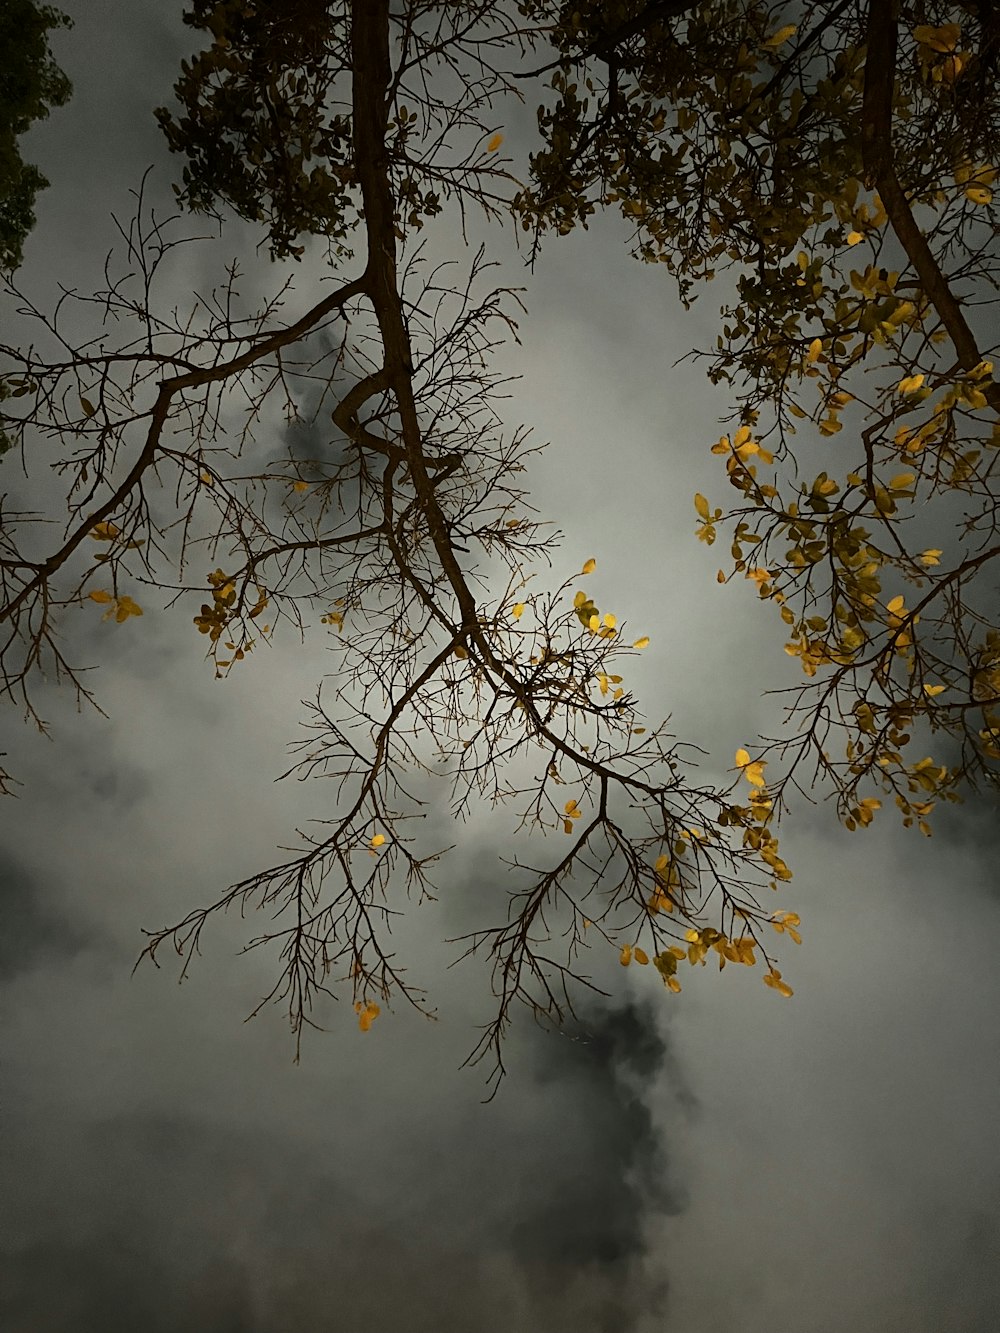 the branches of a tree with yellow leaves against a cloudy sky